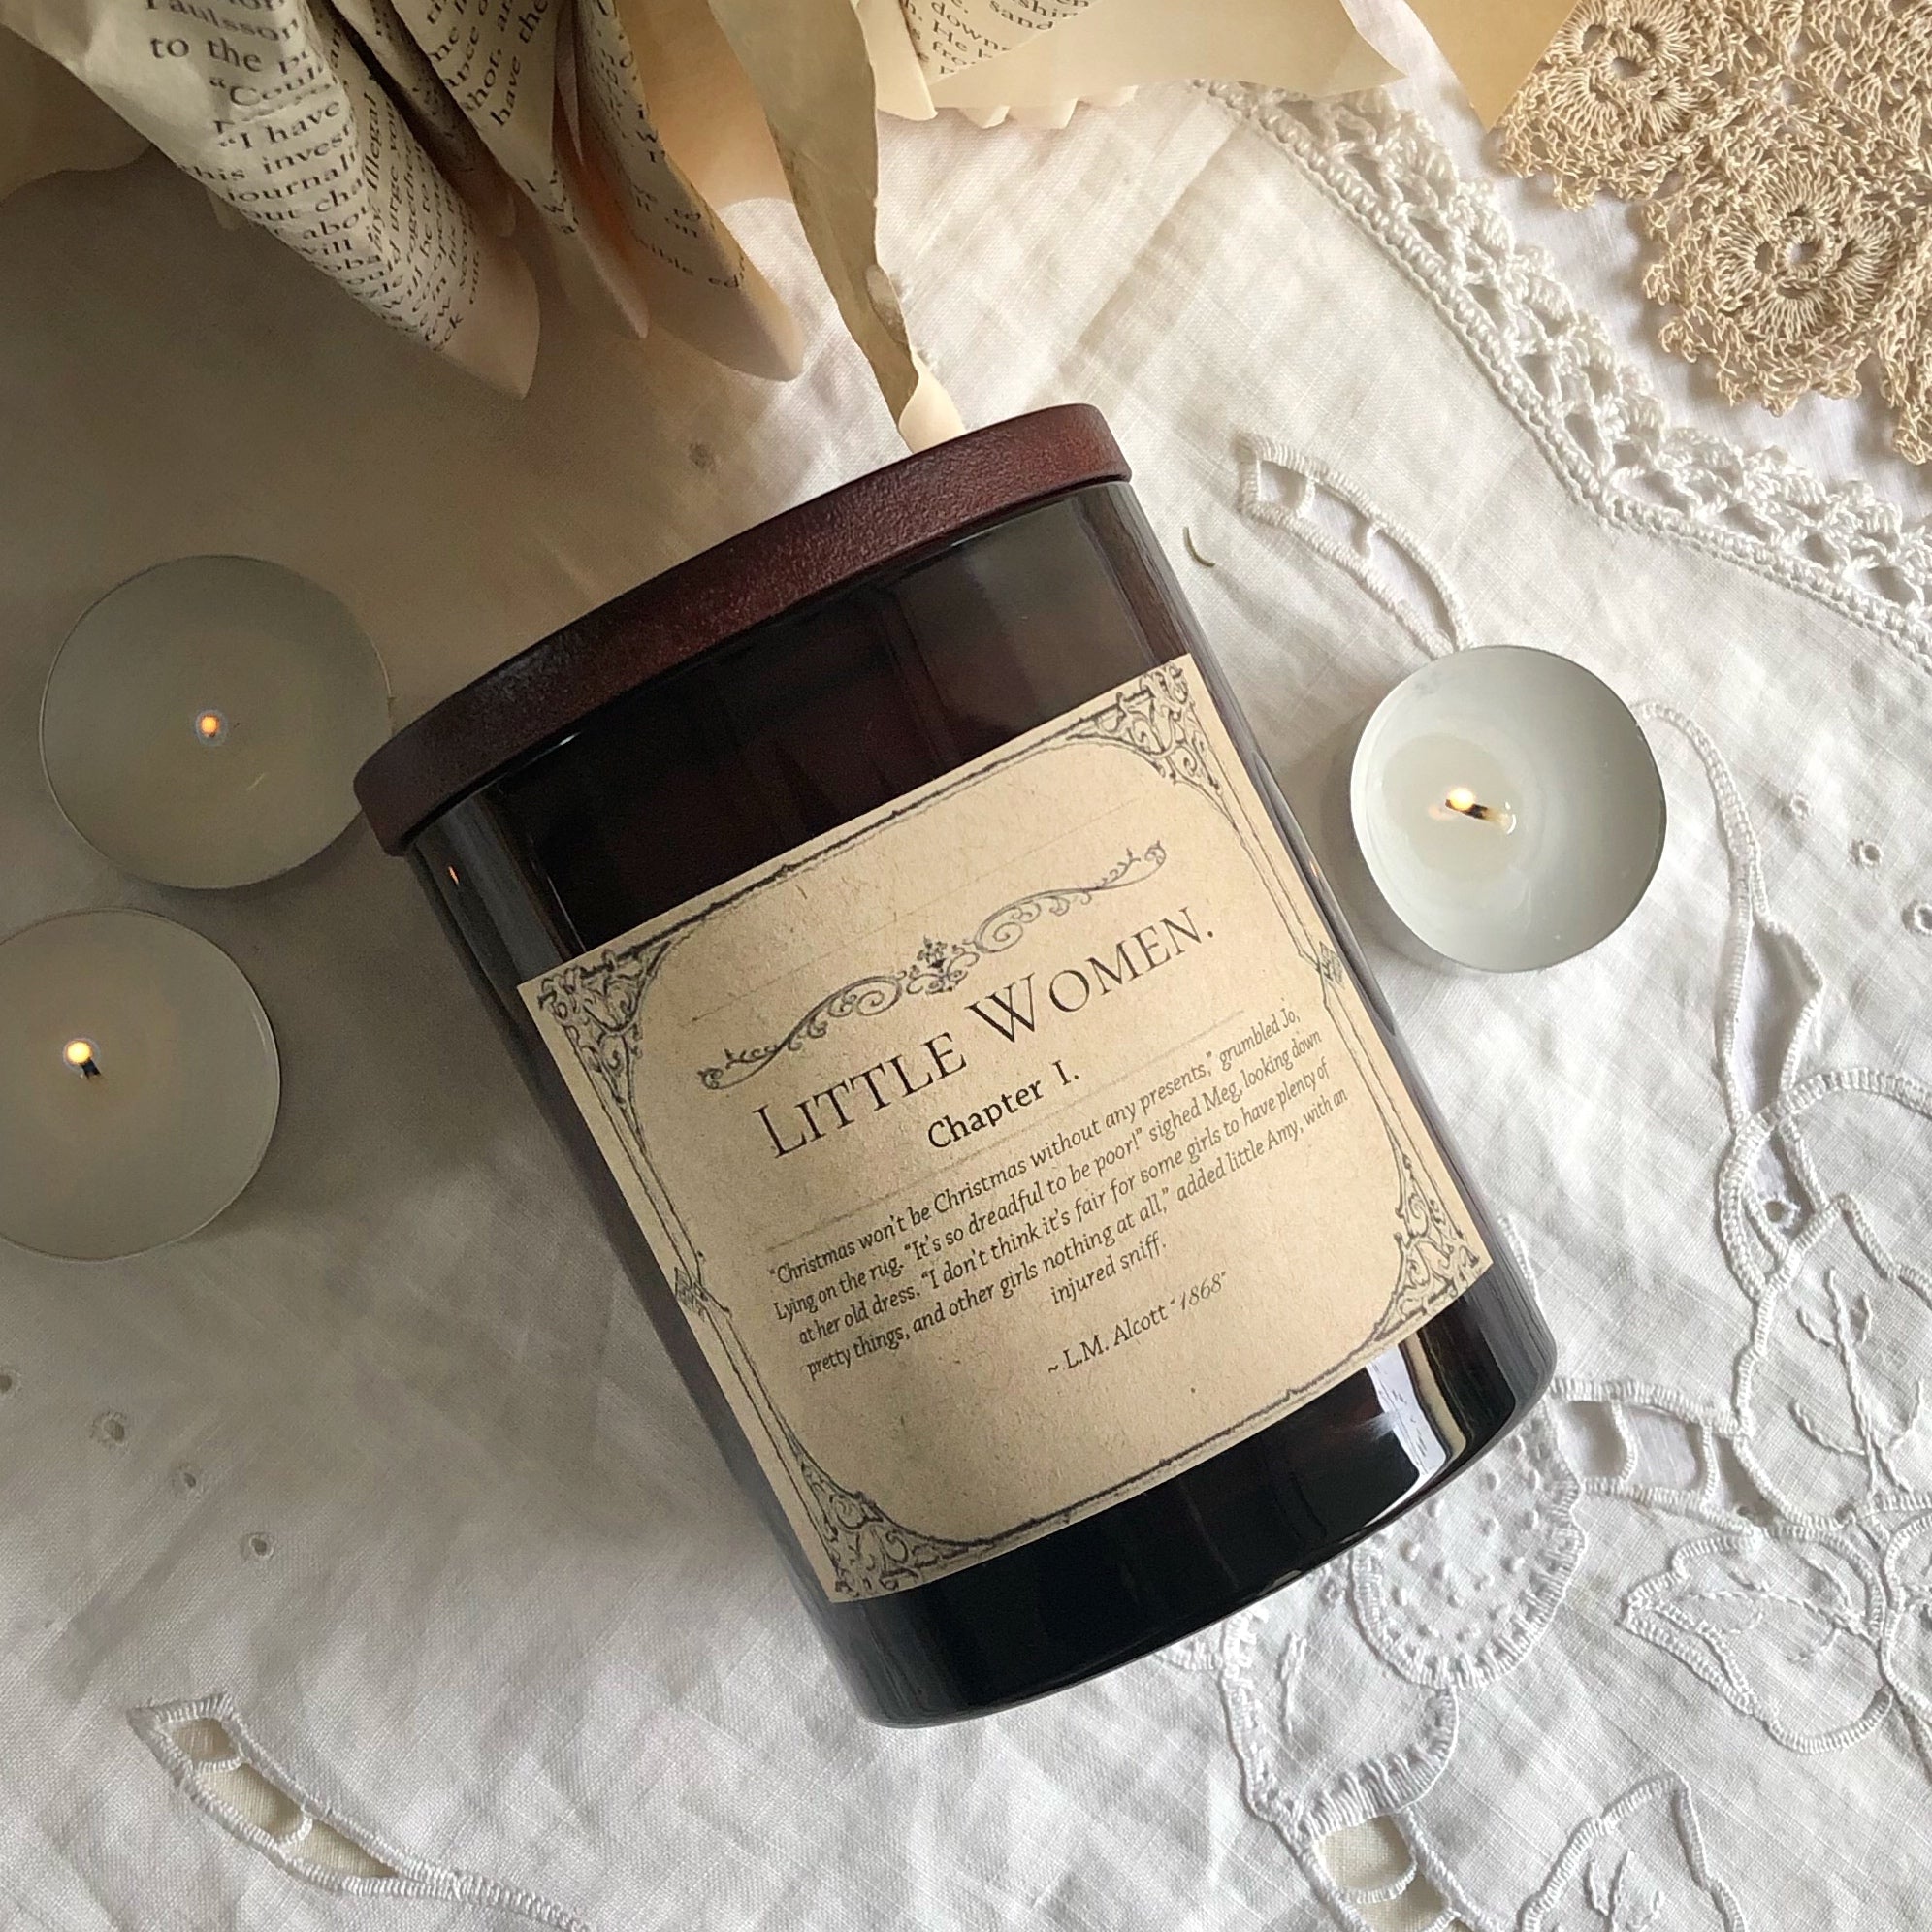 Bookish Candle "Little Women"